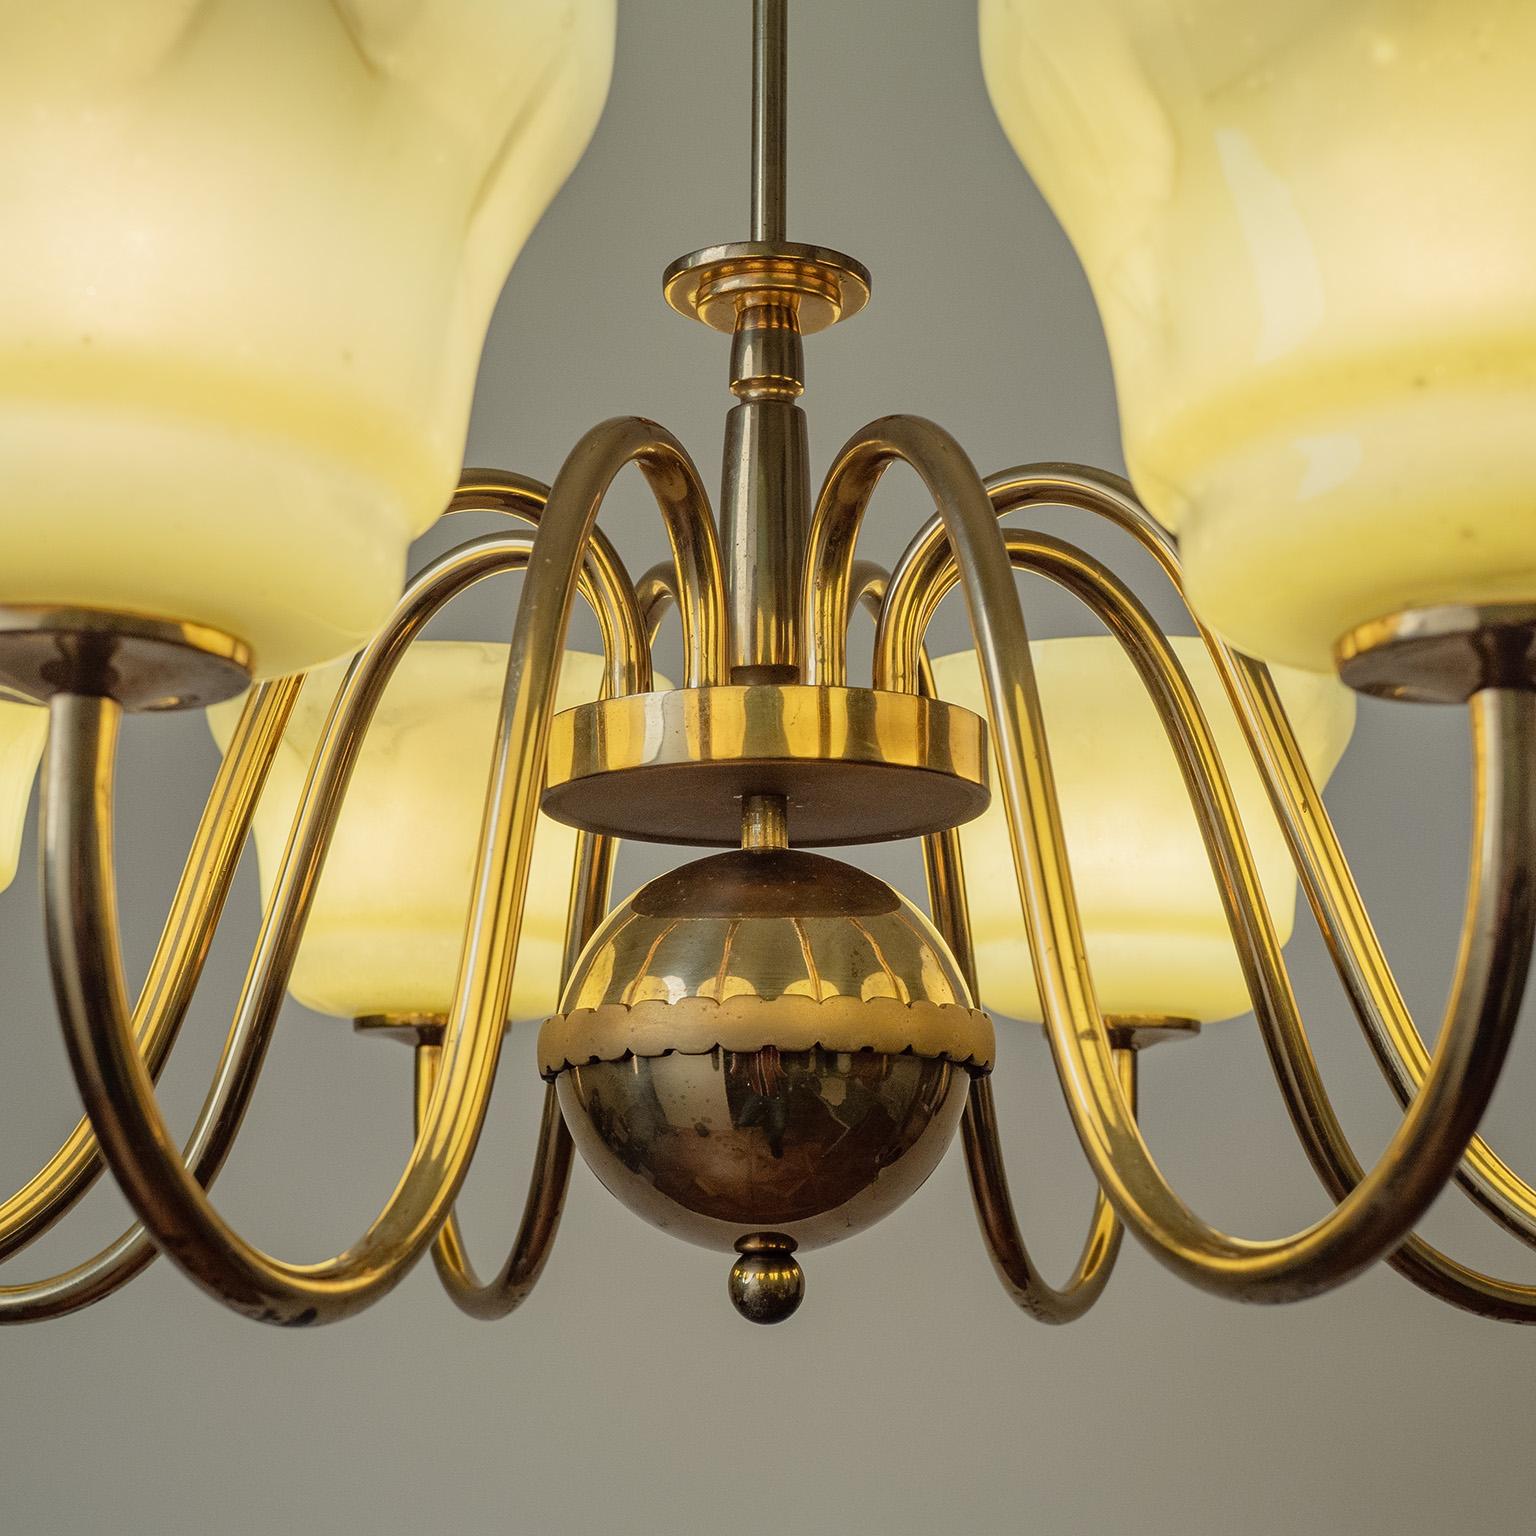 German Large Brass Chandelier with Enameled Glass Shades, 1940s For Sale